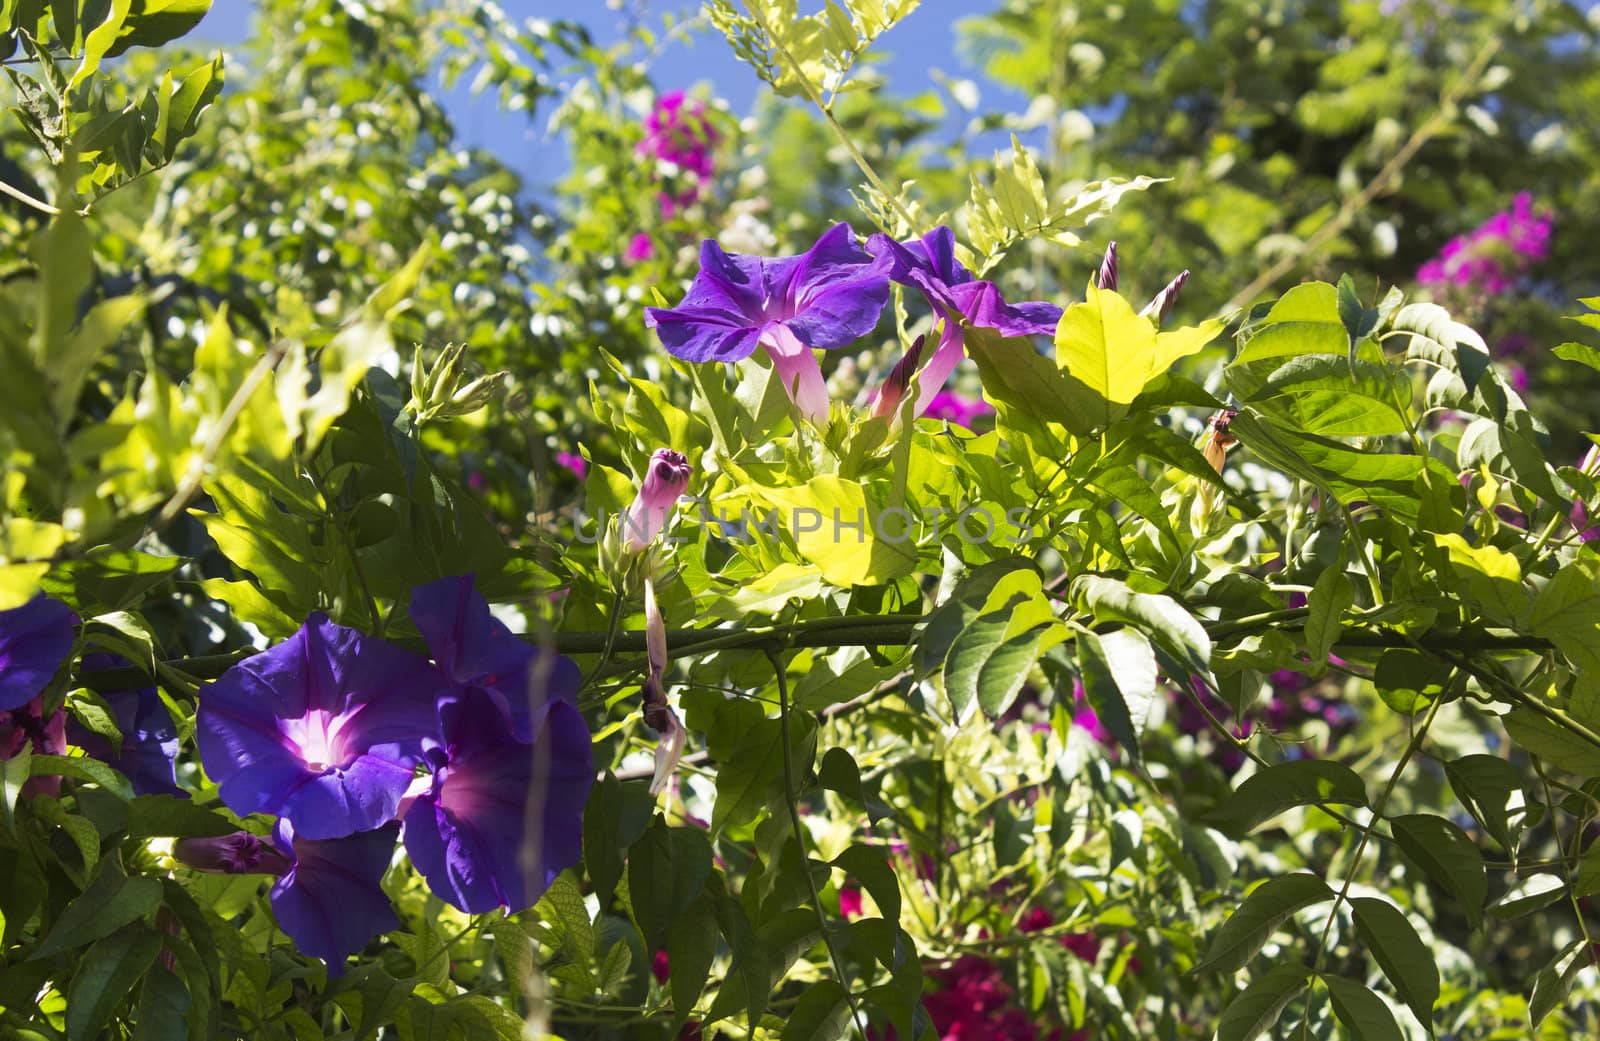 flowering shrub with blue and purple flowers